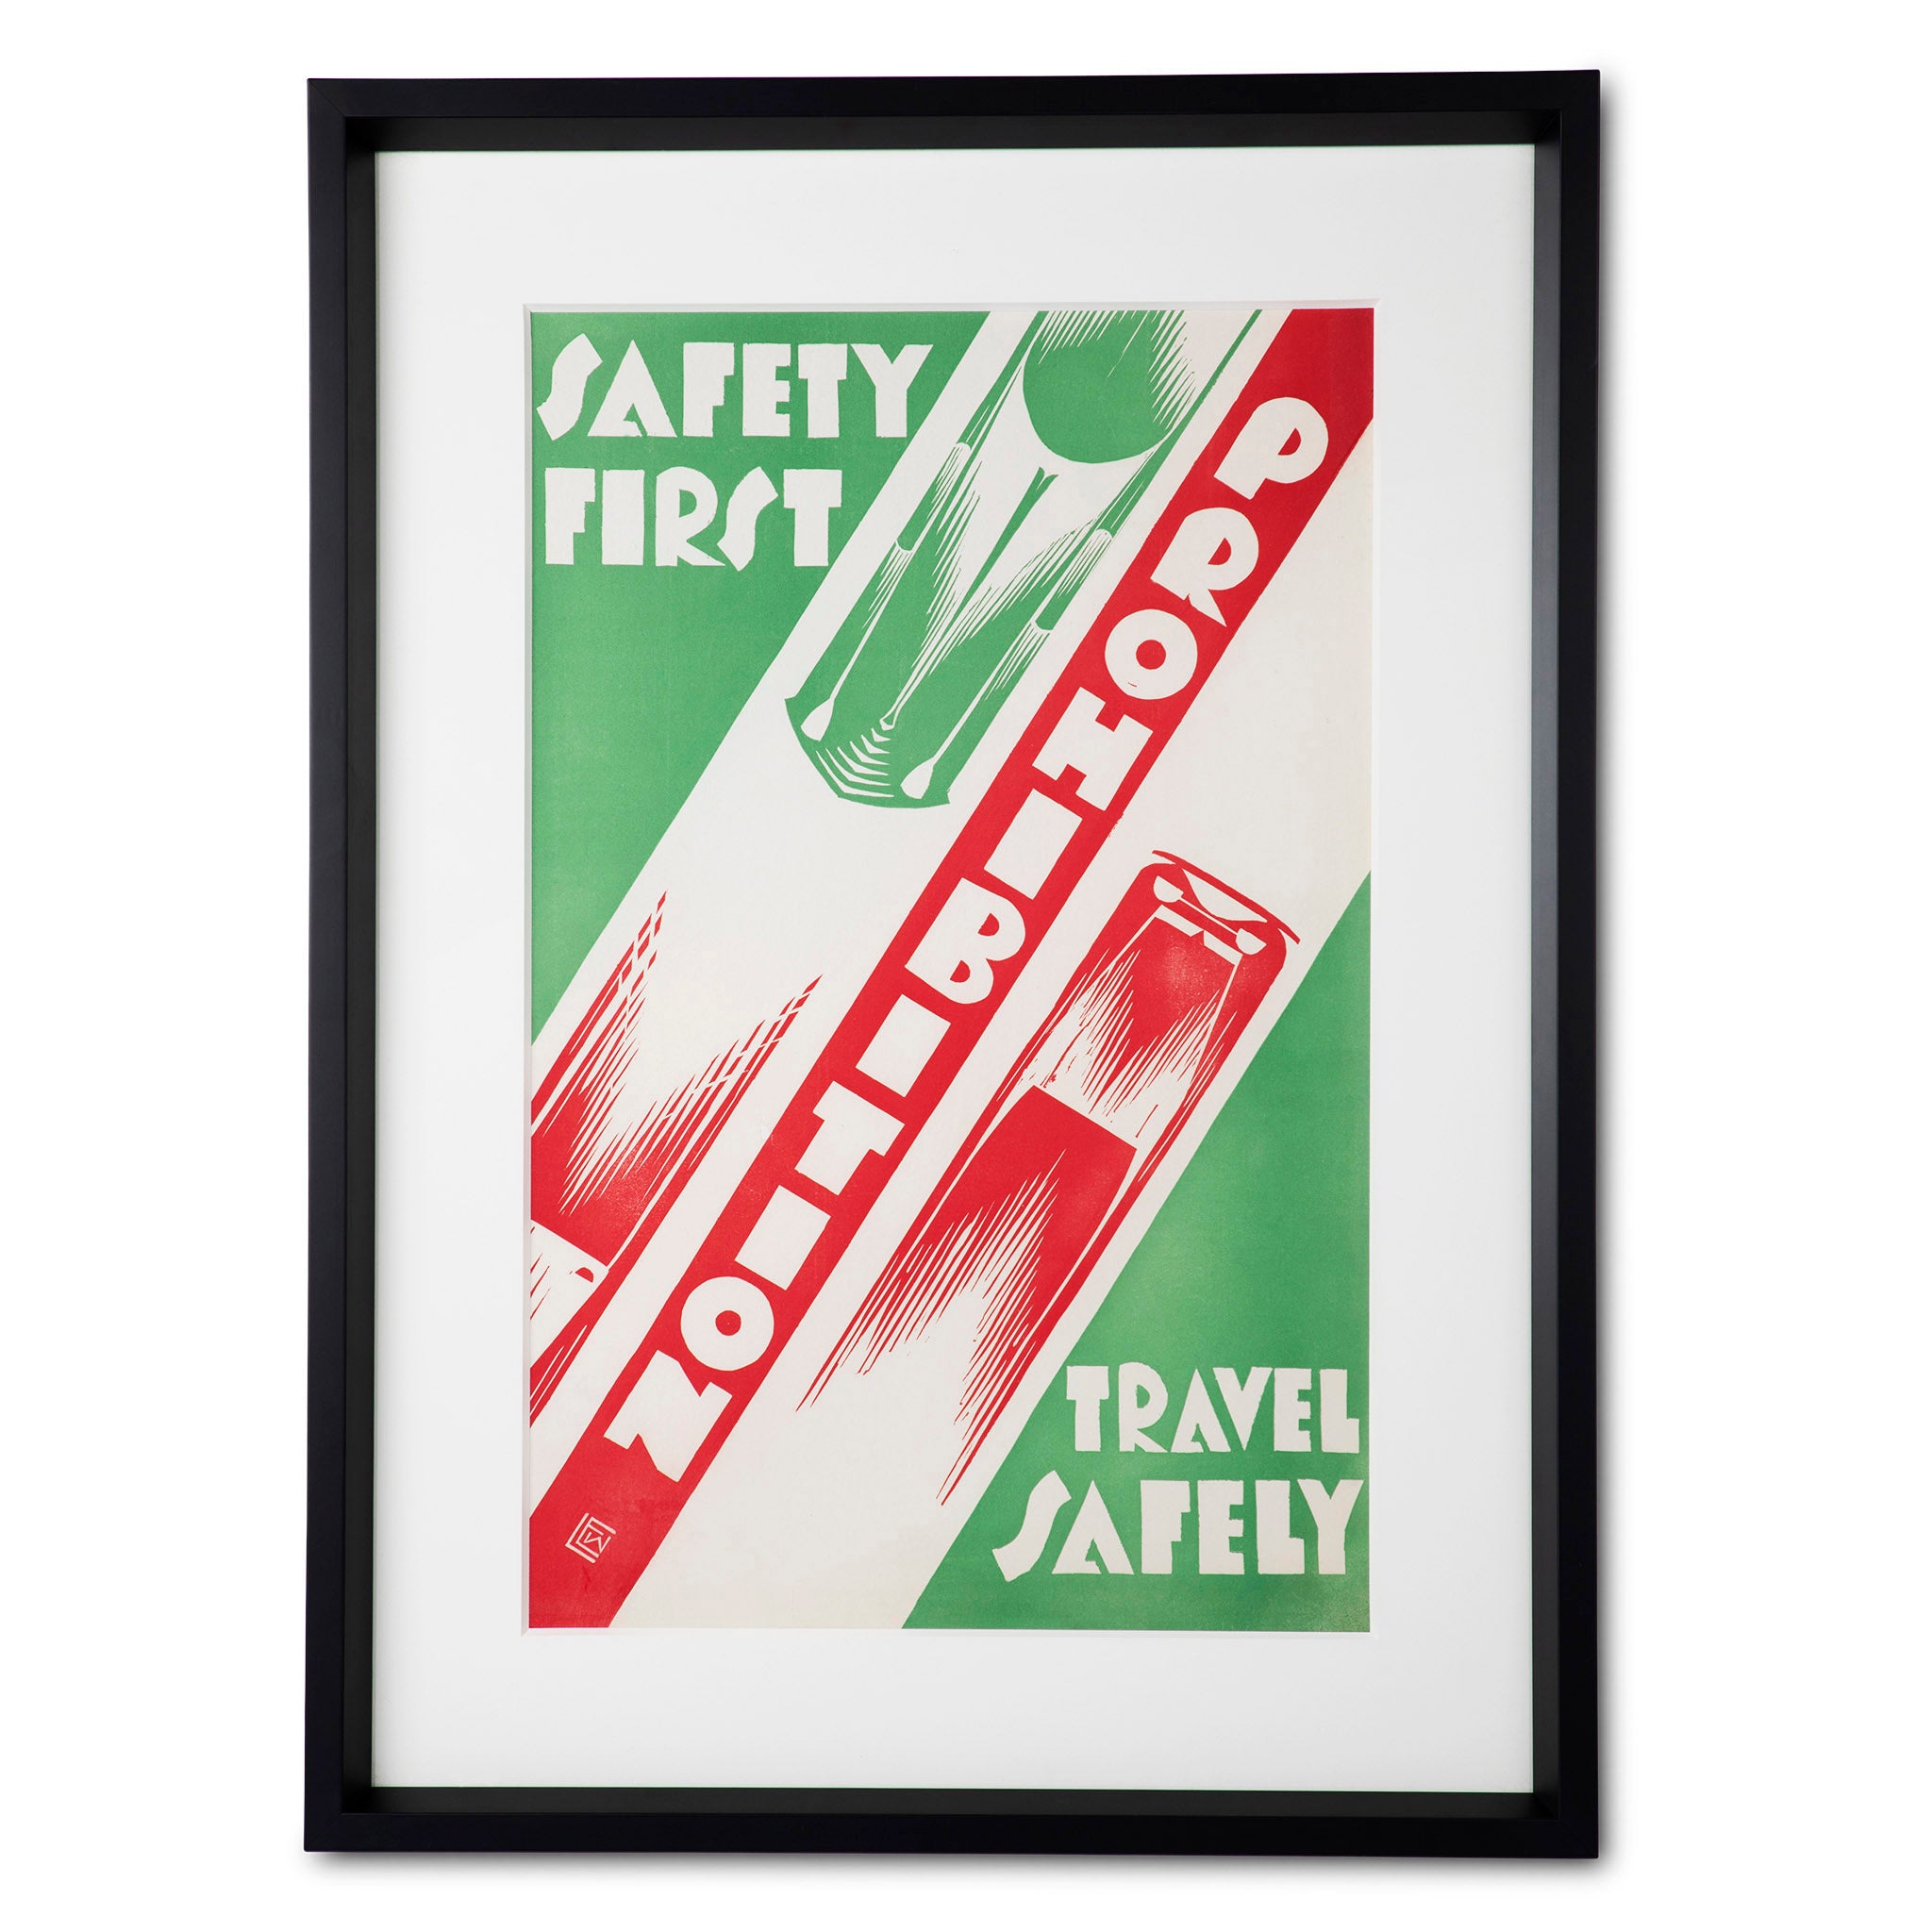 Prohibition Safety First Original Poster